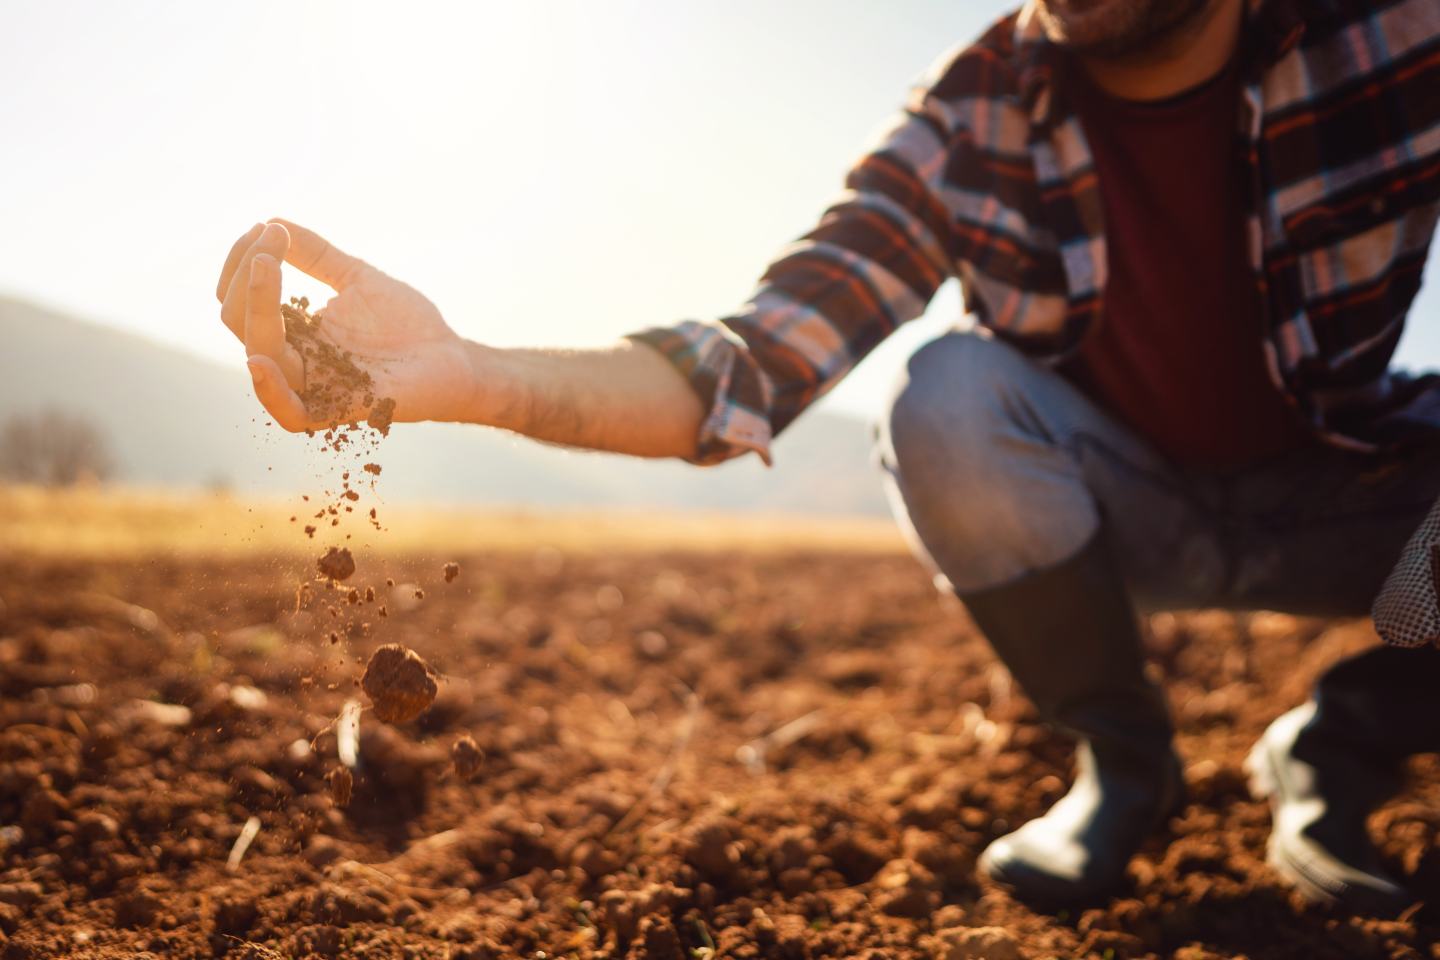 A farmer (photo taken from shoulders and below) crouches in a tilled field. Loose dirt falls from their hand, back to the soil. The farmer is wearing rubber rainboots, jeans, and a flannel shirt. 